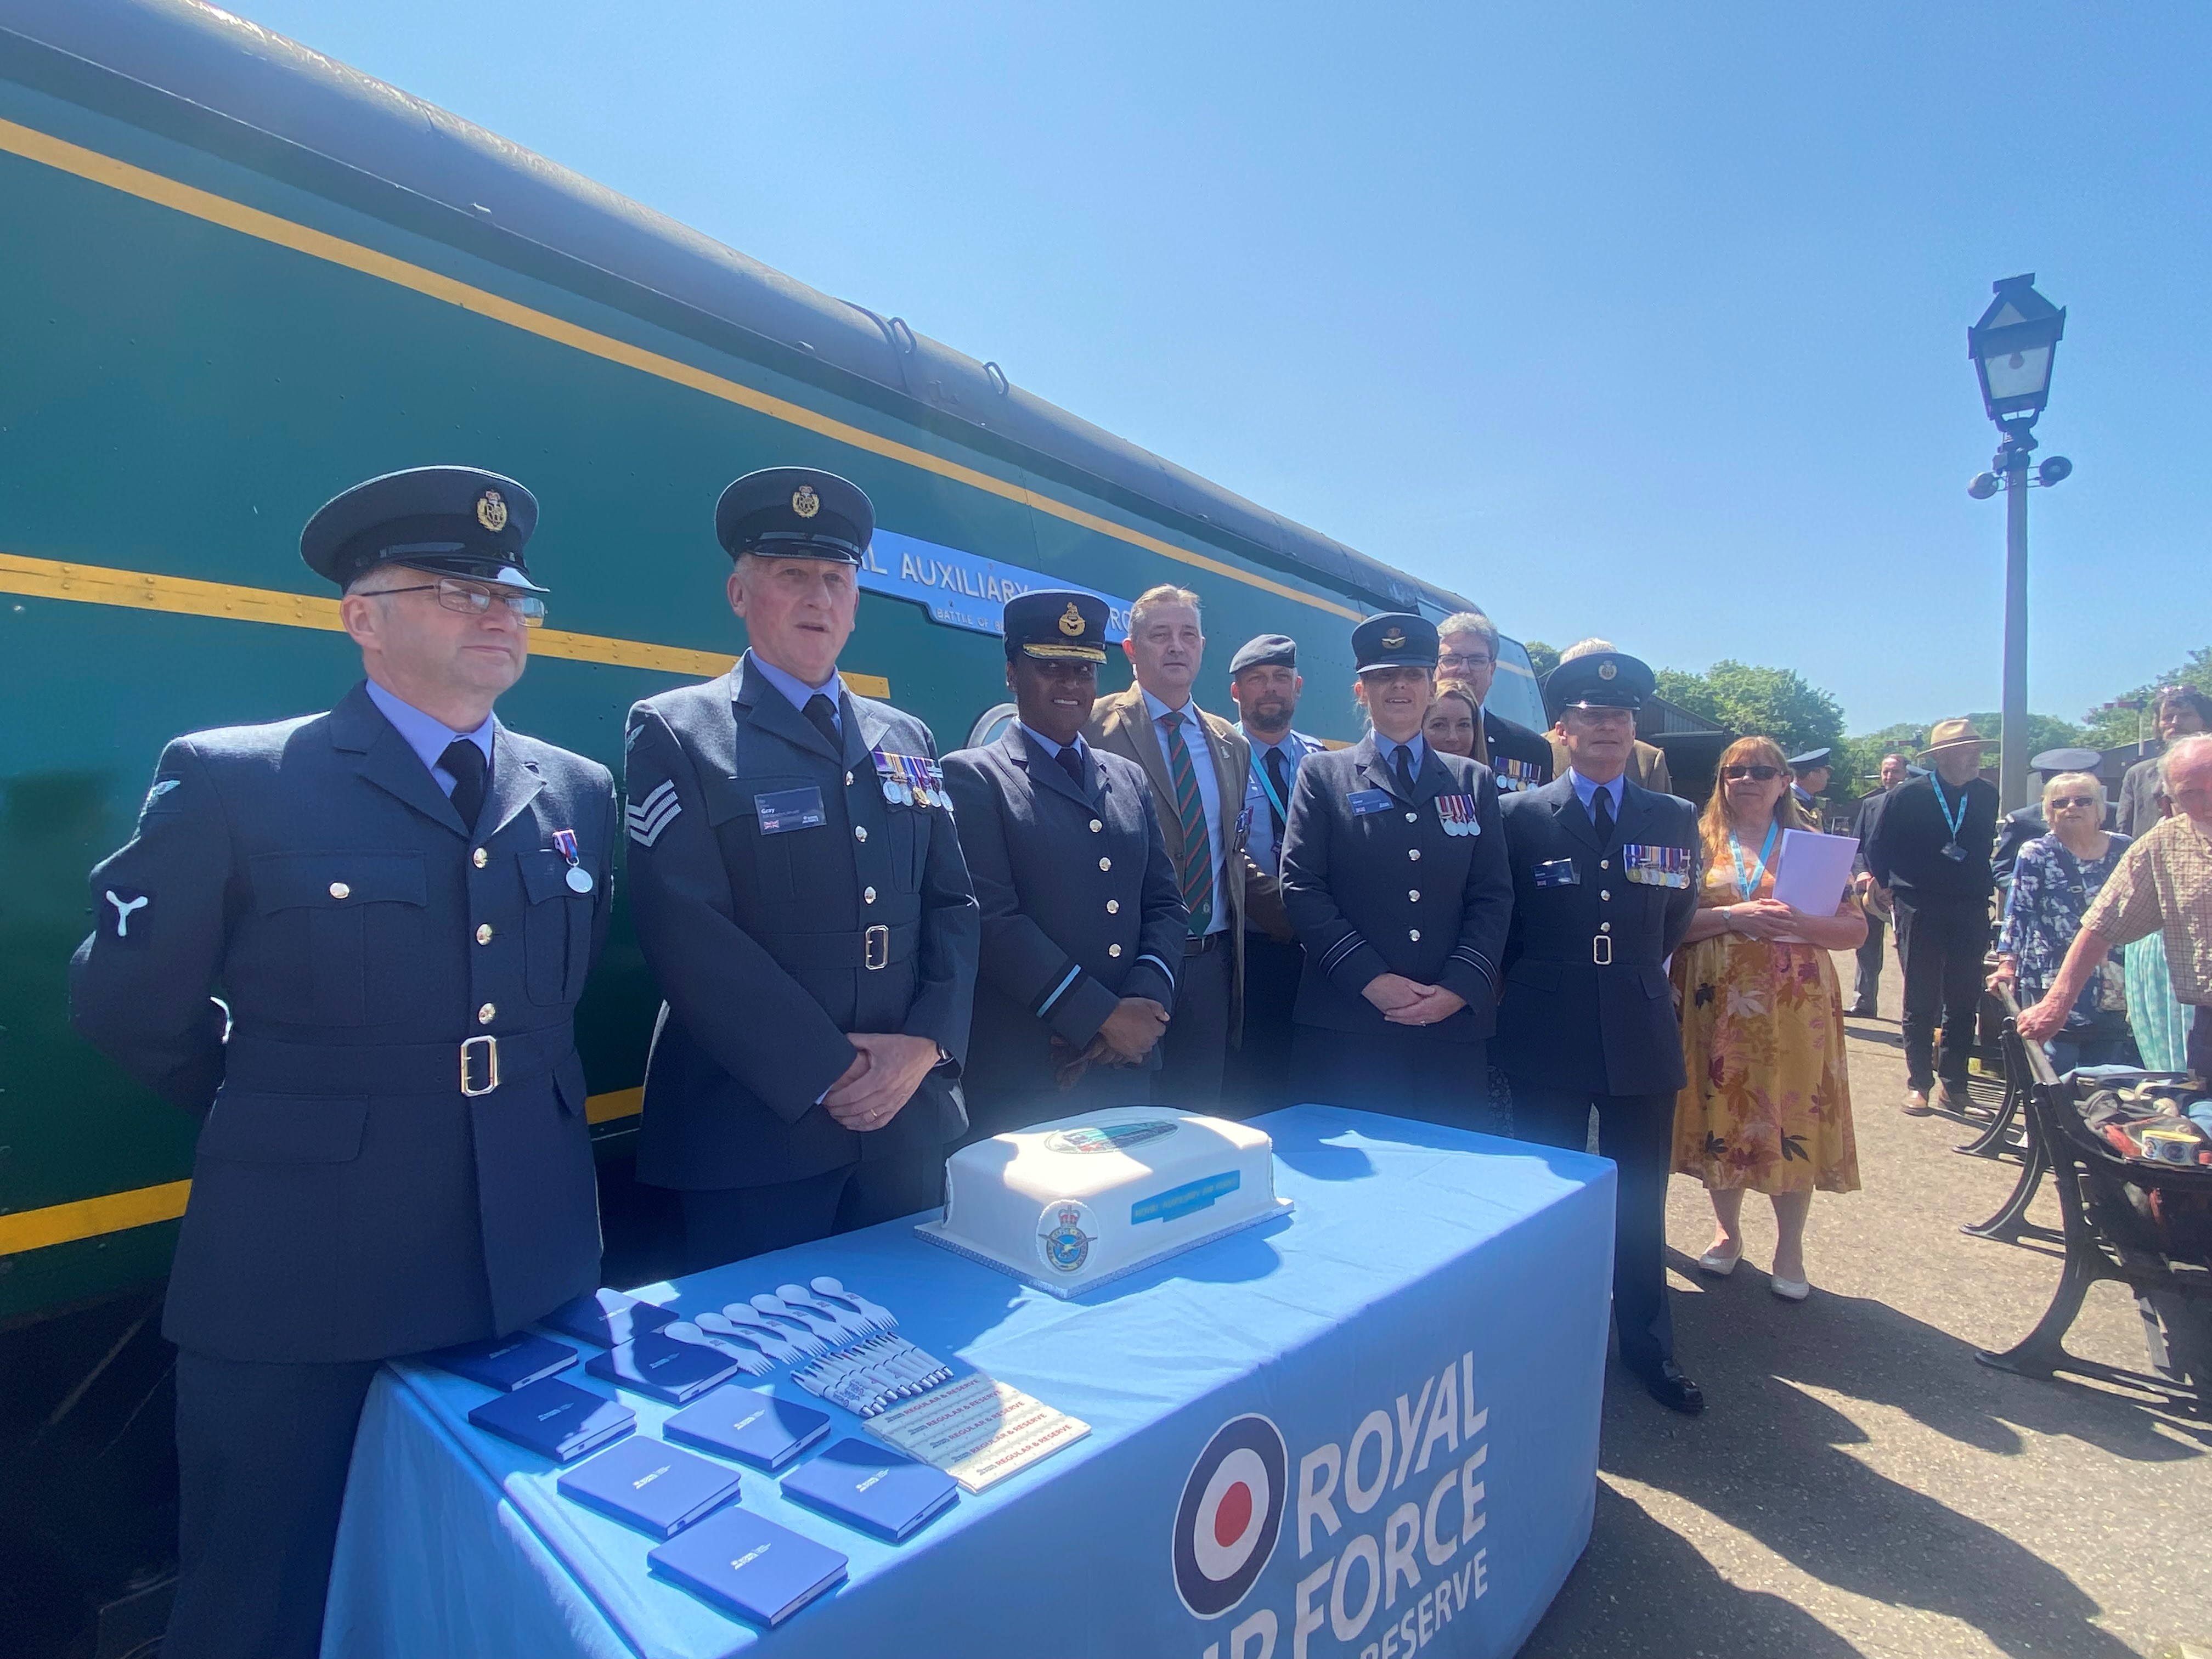 Personnel from 504 Sqn, based at RAF Wittering, attended a special renaming ceremony of a Steam Locomotive